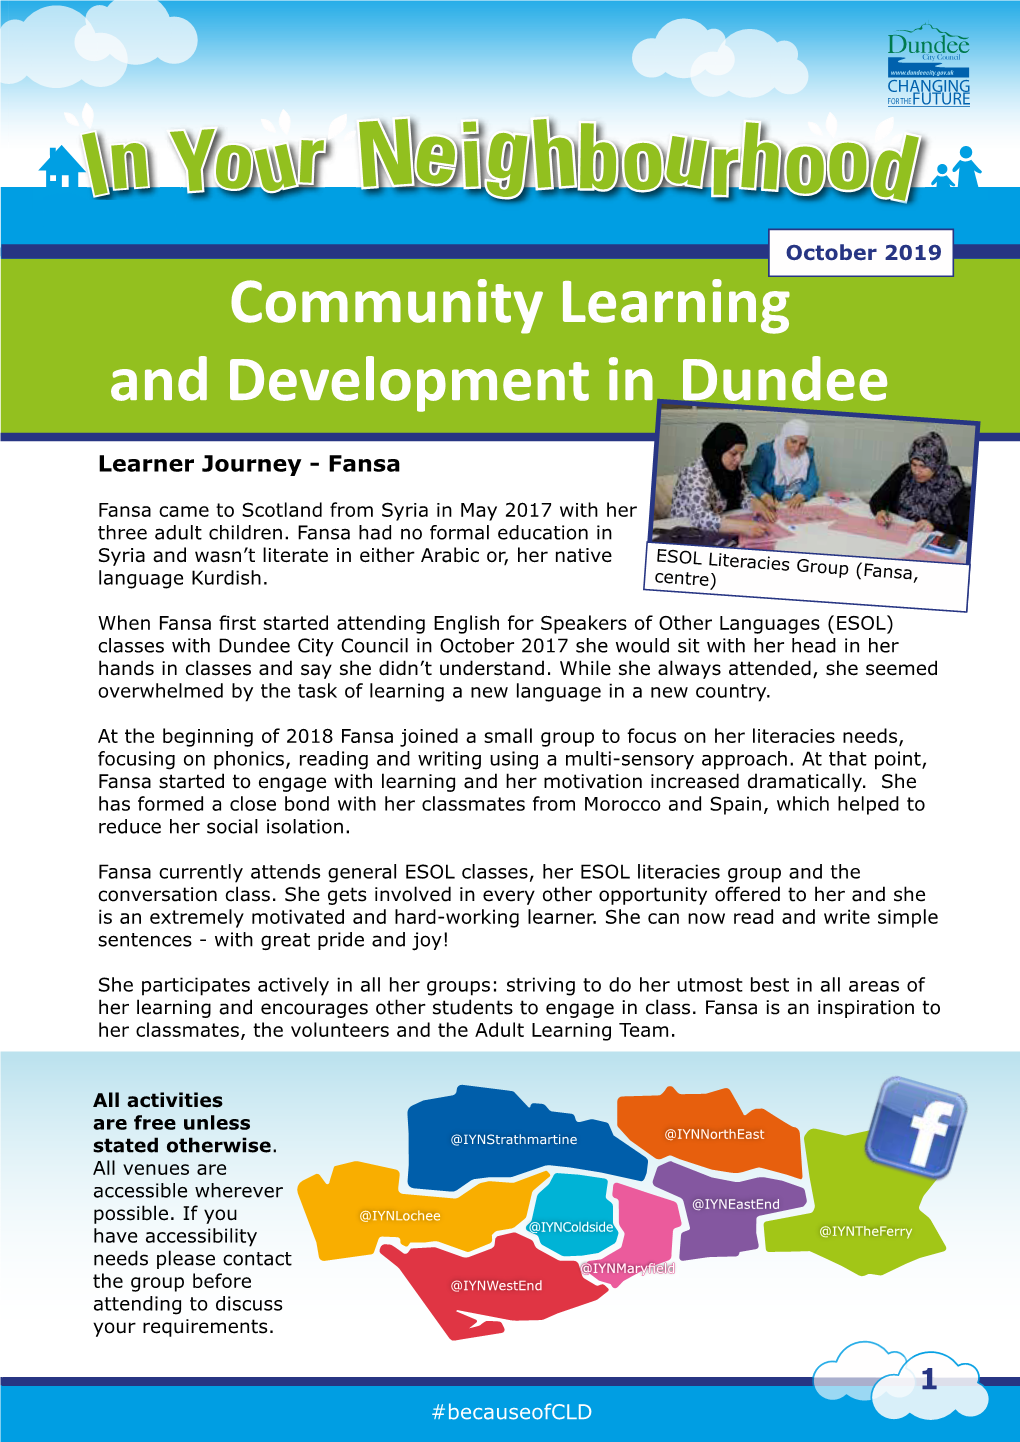 Community Learning and Development in Dundee